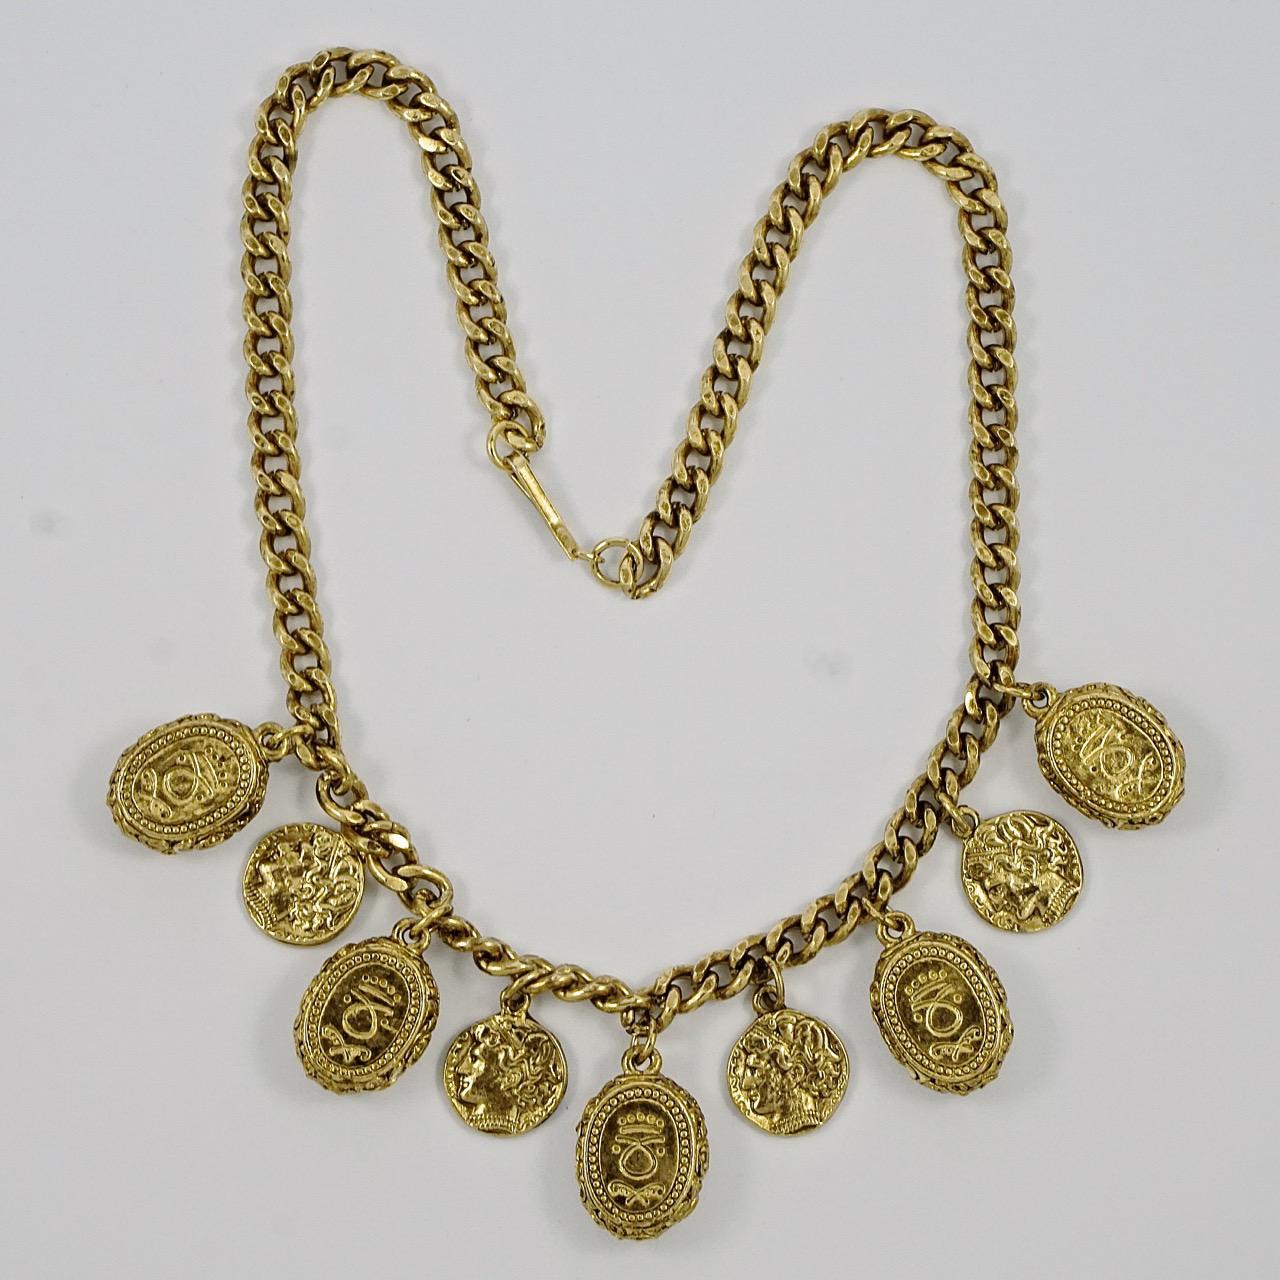 Gold Plated Curb Chain Necklace with Glass Jewel and Coin Drops, circa 1980s For Sale 1